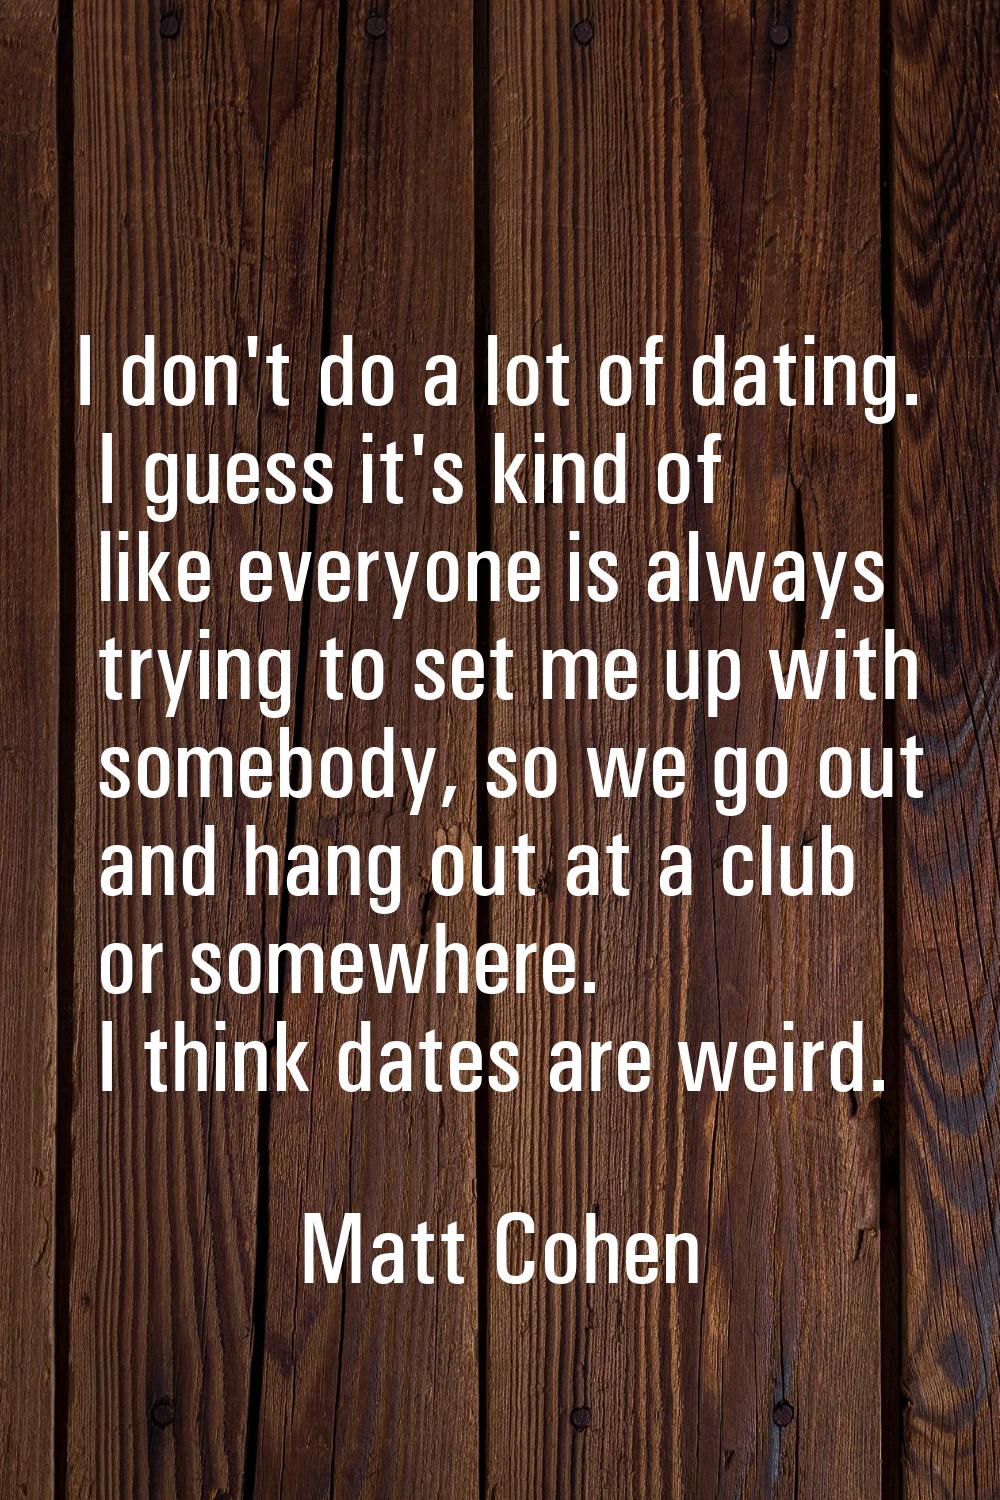 I don't do a lot of dating. I guess it's kind of like everyone is always trying to set me up with s